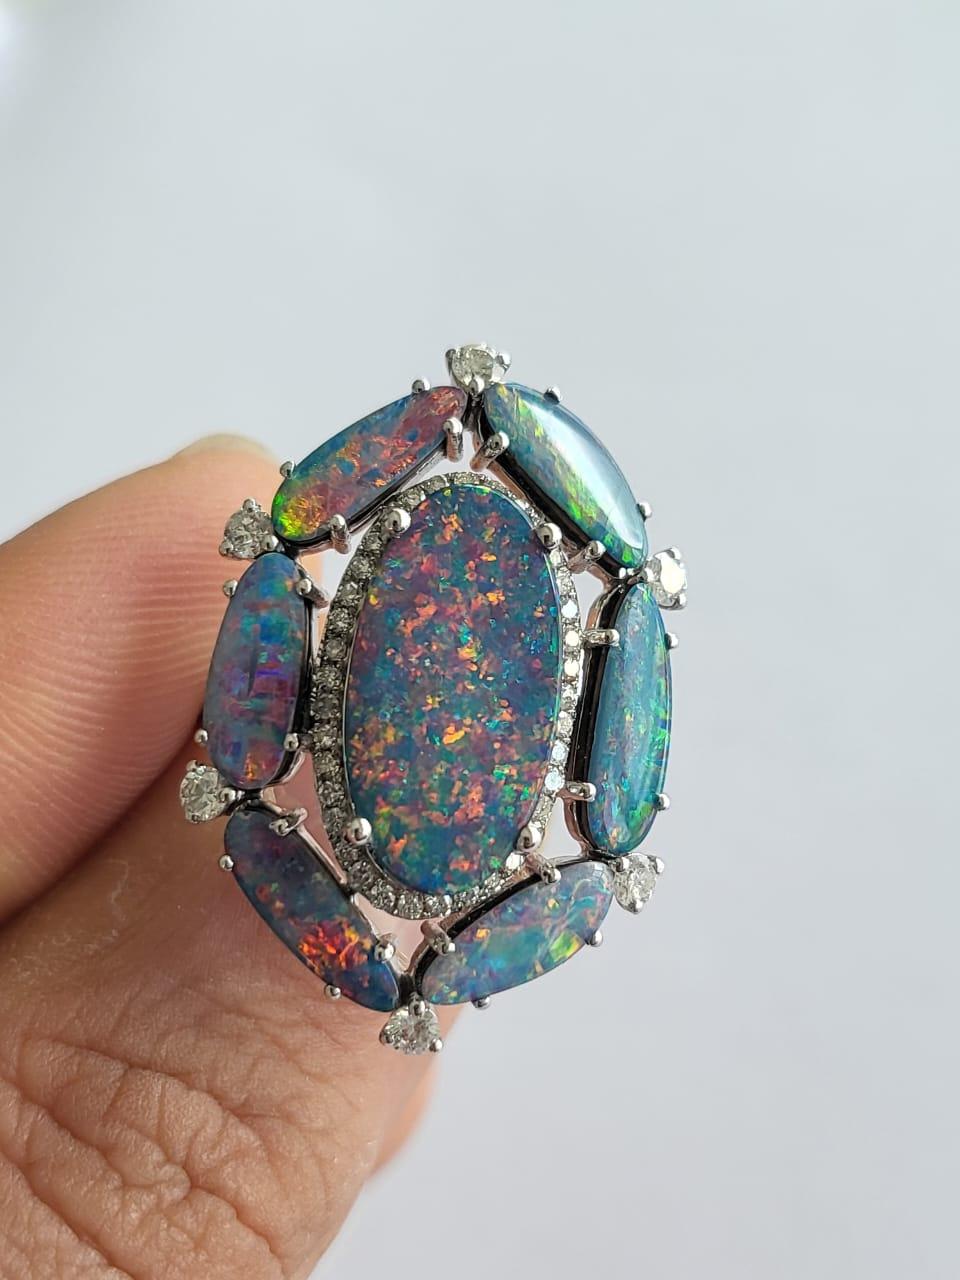 A very gorgeous and on of a kind, Doublet Opal Cocktail Ring set in 18K White Gold & Diamonds. The weight of the Australian Doublet Opals is 6.68 carats. The Diamonds weight is 0.65 carats. Net Gold weight is 6.954 grams. The dimensions of the ring